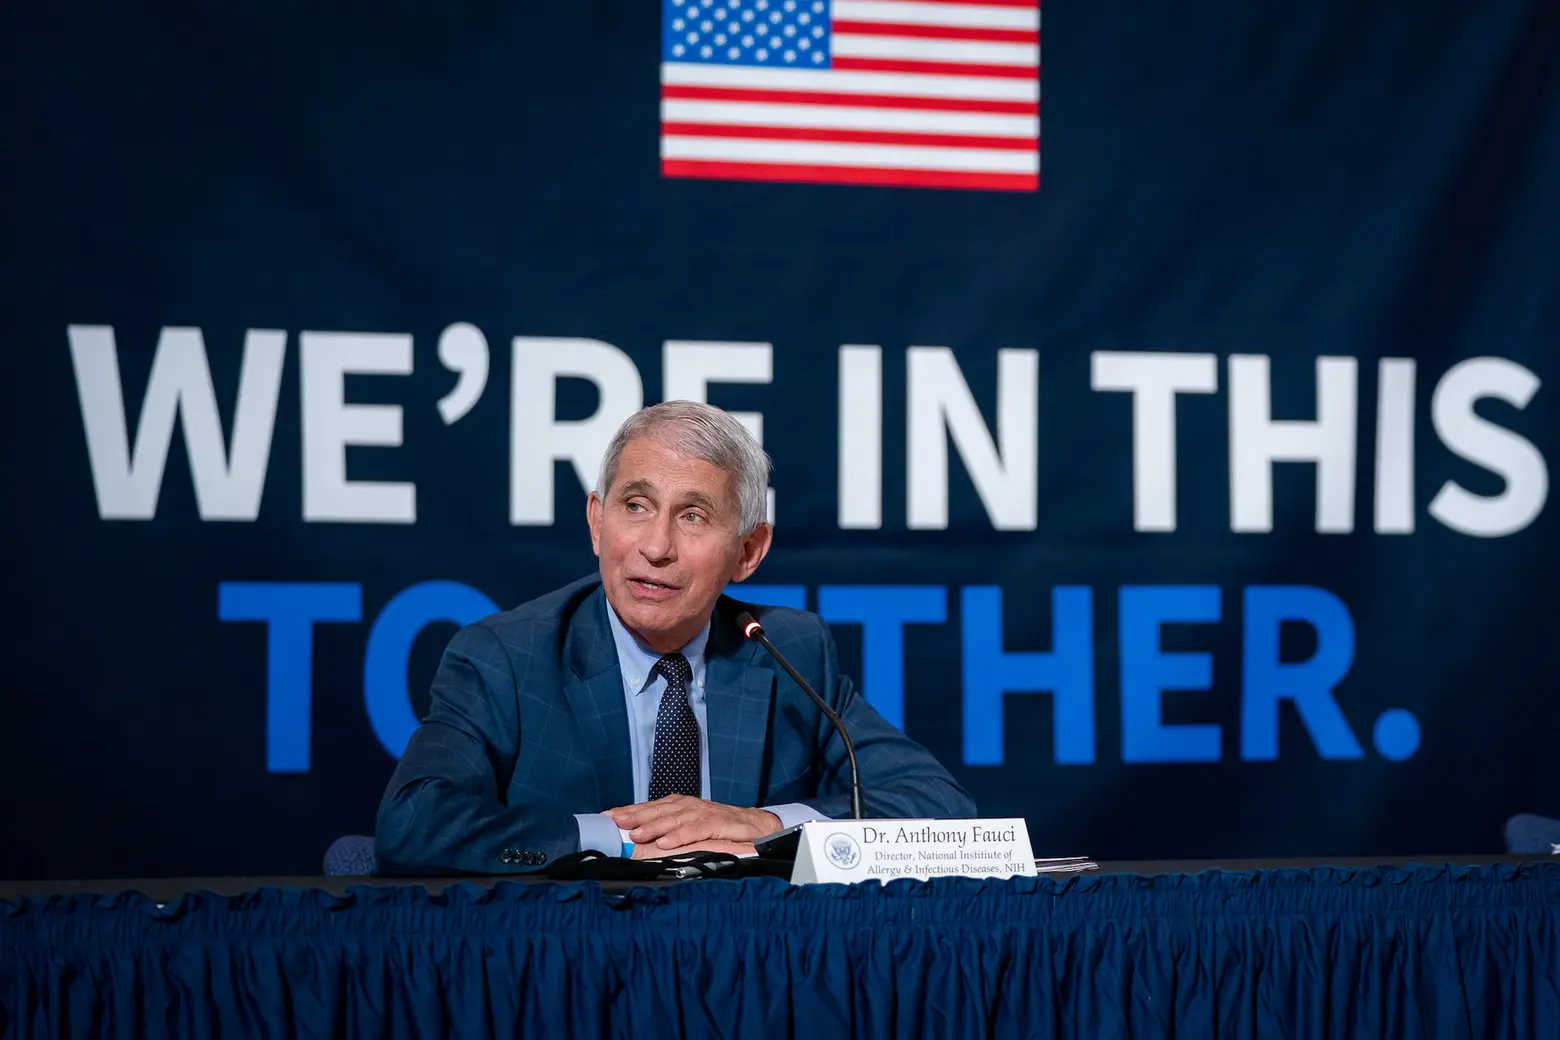 Dr. Anthony Fauci honored as ‘Brooklyn COVID Hero’